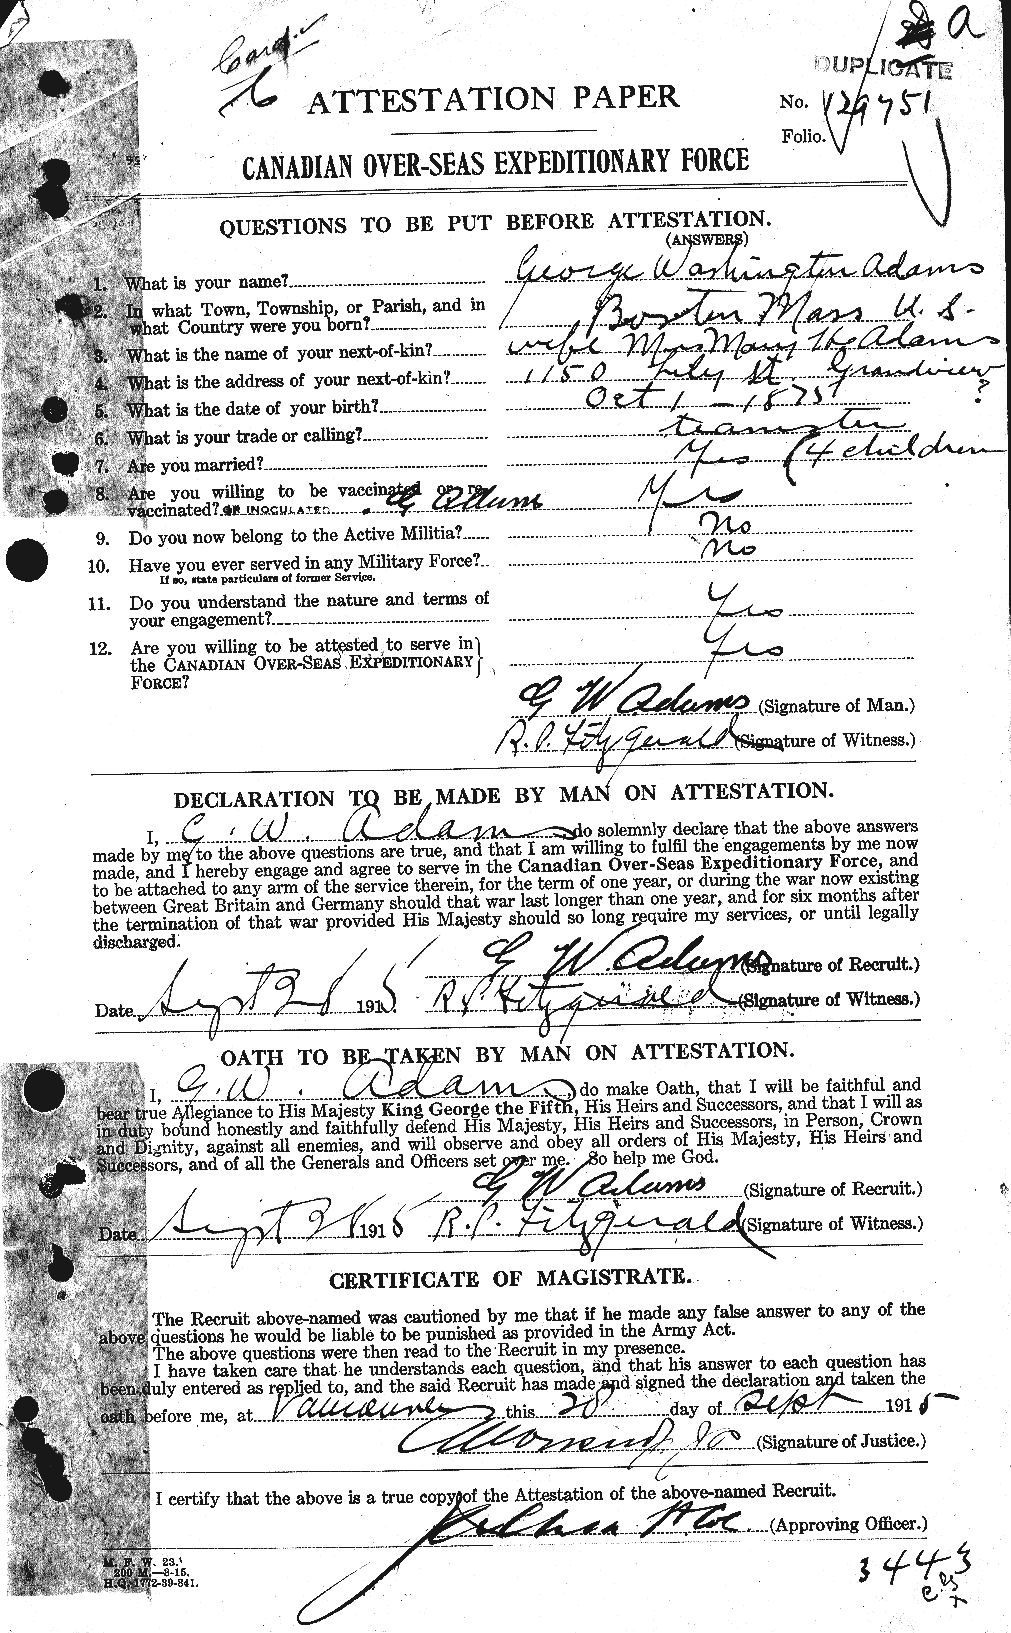 Personnel Records of the First World War - CEF 203123a